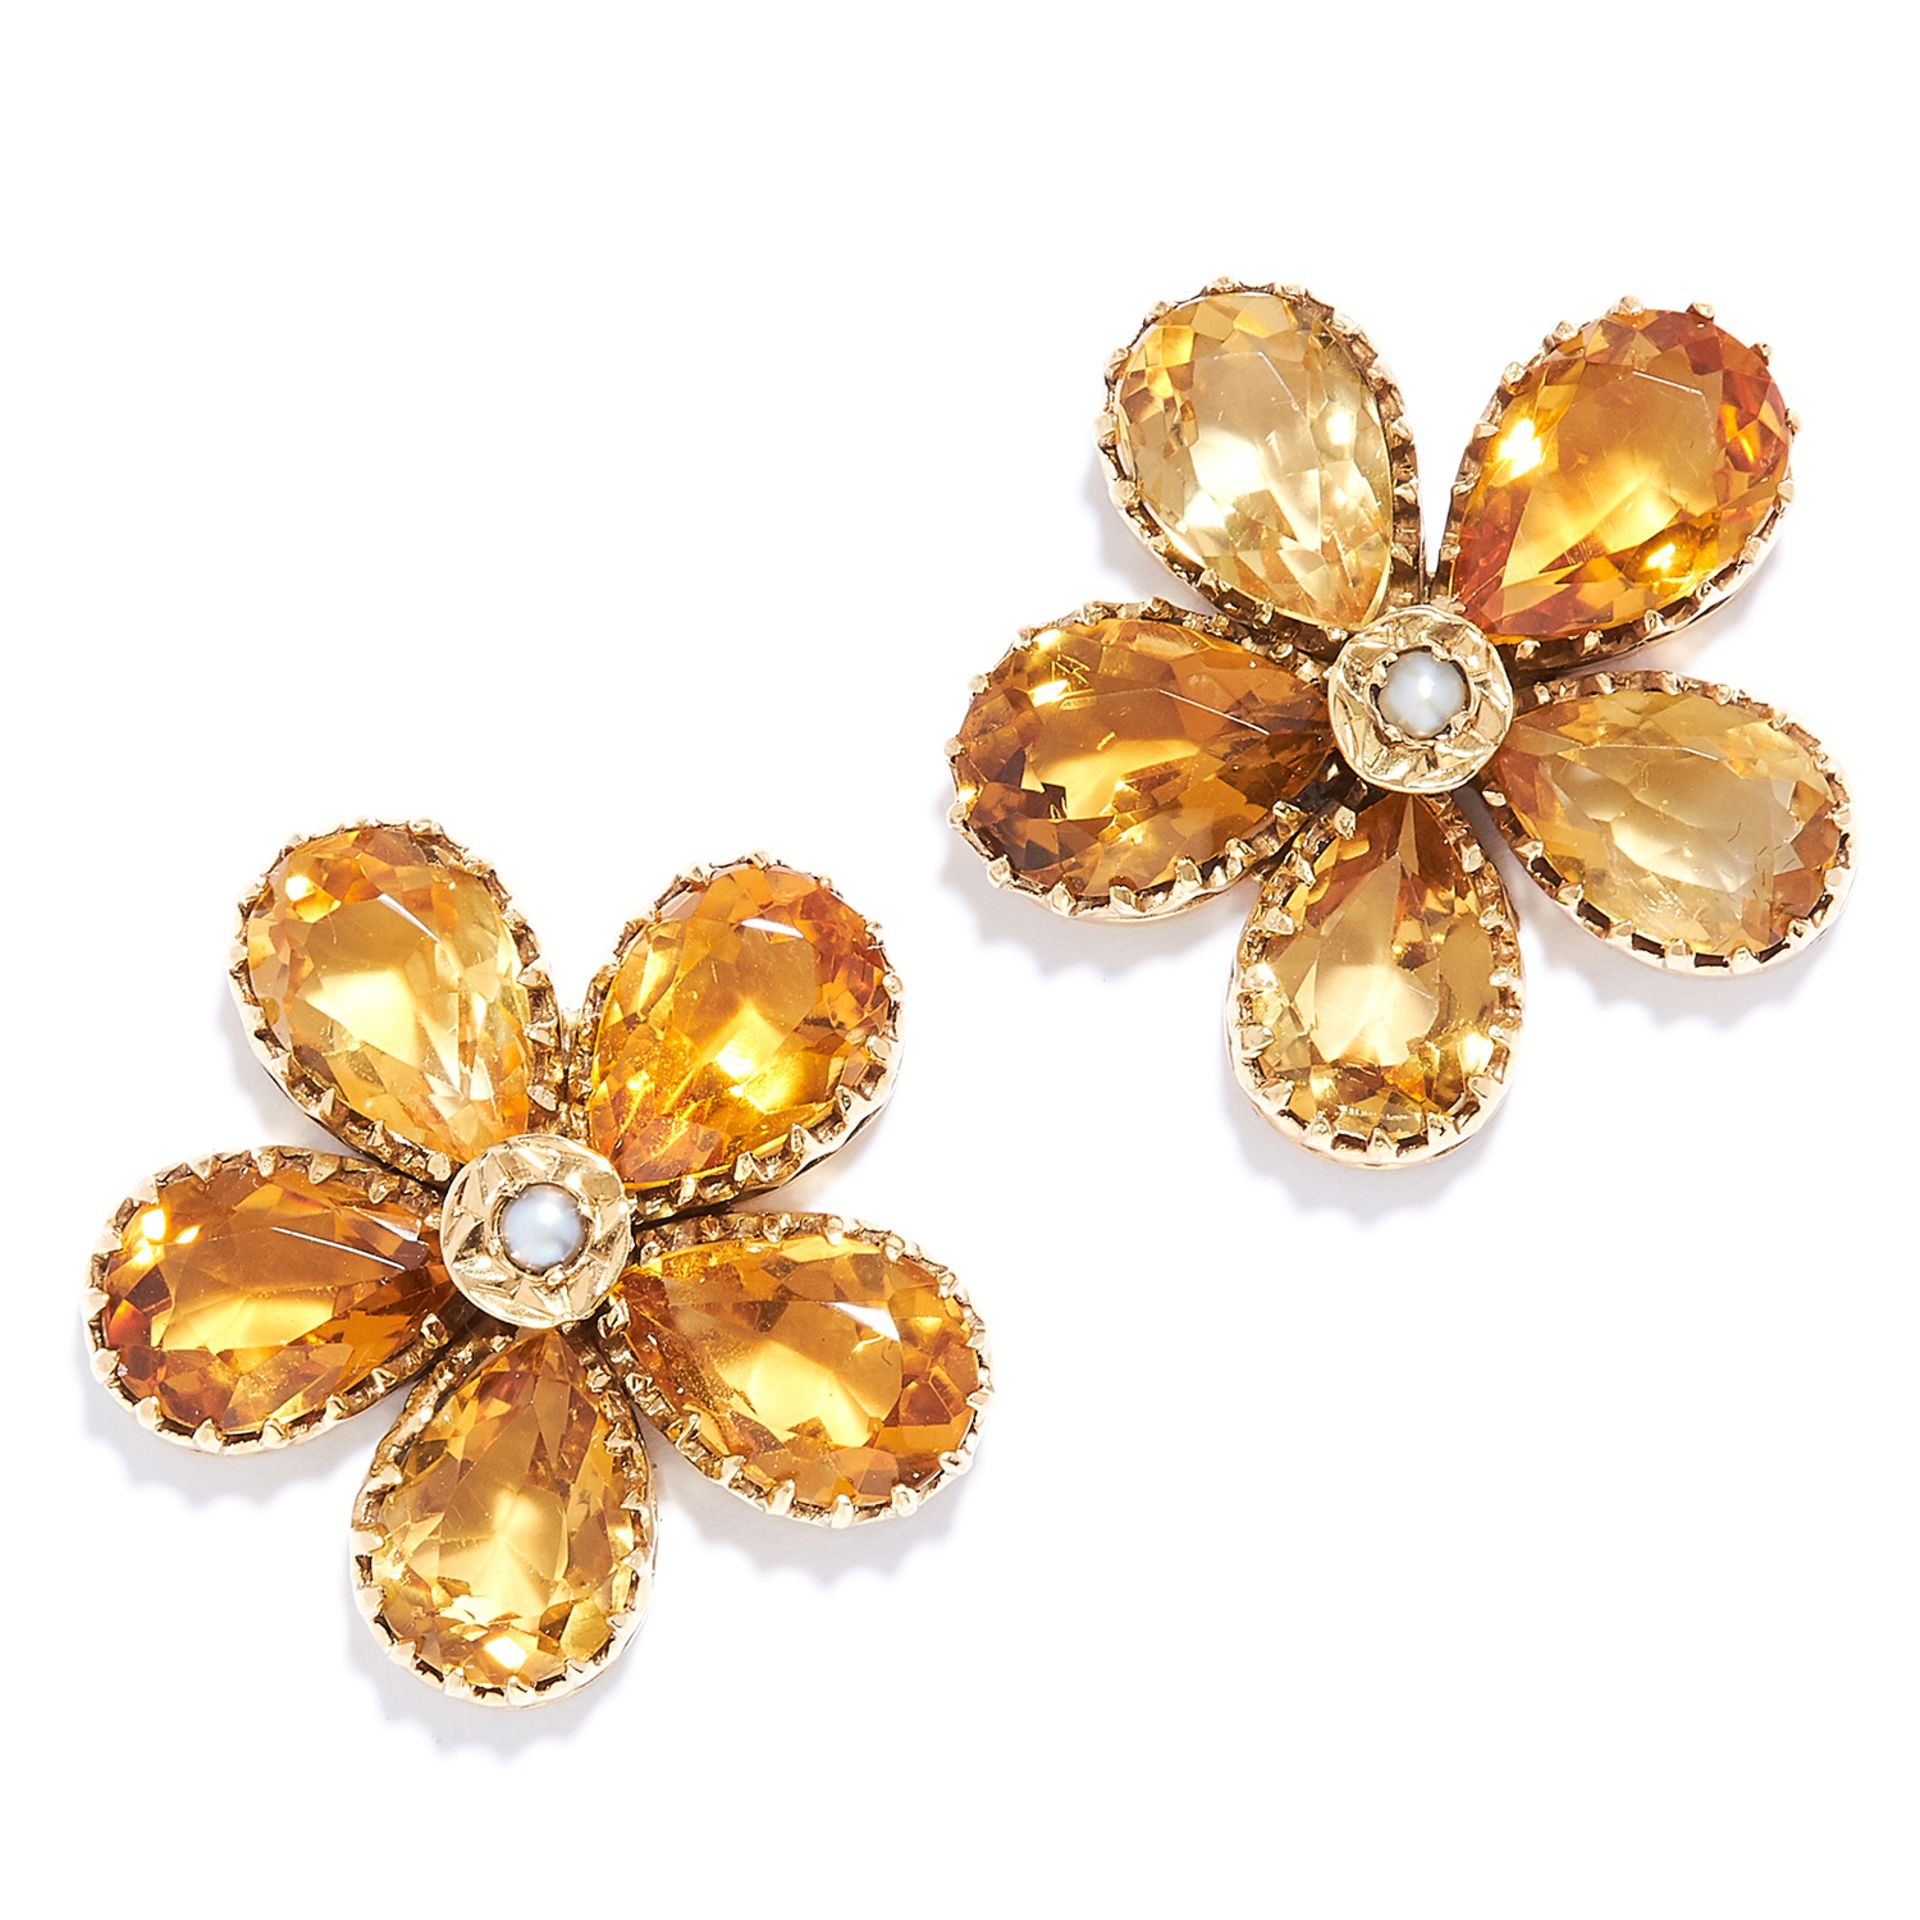 CITRINE AND PEARL FLOWER EARRINGS in yellow gold, each set with a pearl and pear cut citrines,